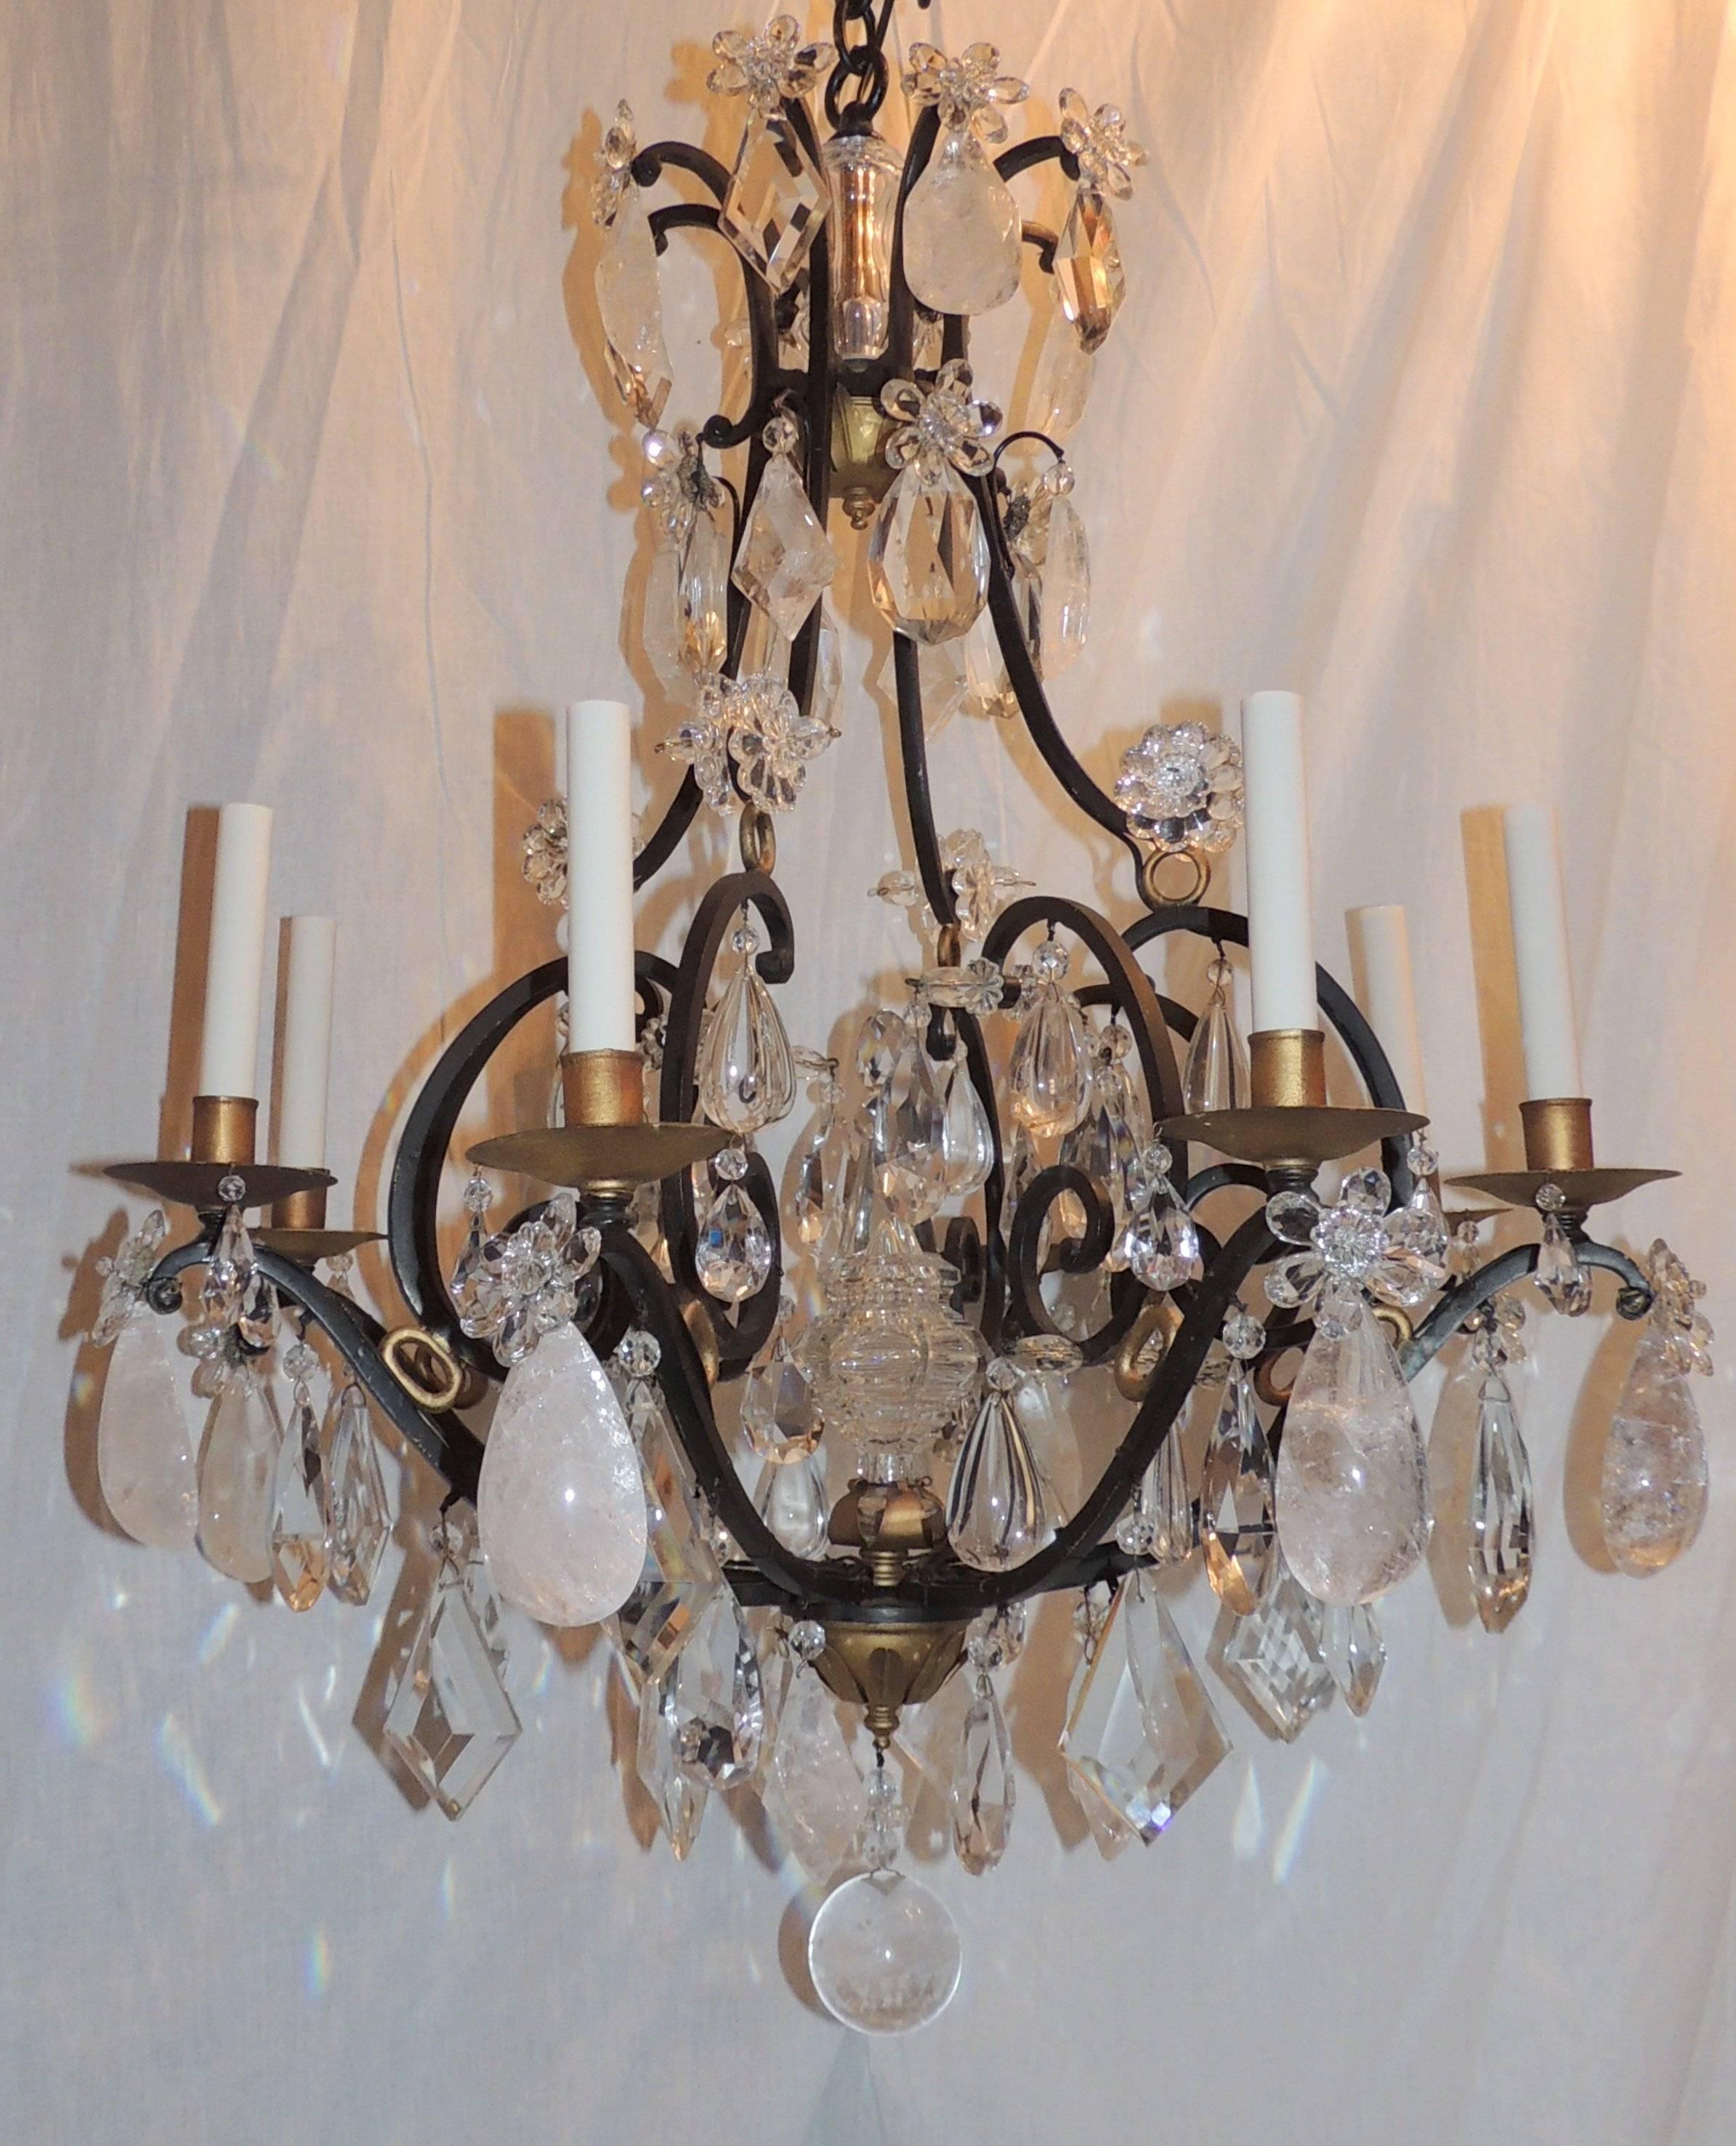 Beautiful scrolled wrought iron eight-arm chandelier with gilt candle cups and accents. Beautiful rock and prism crystal are throughout this wonderful chandelier.

Measures: 36